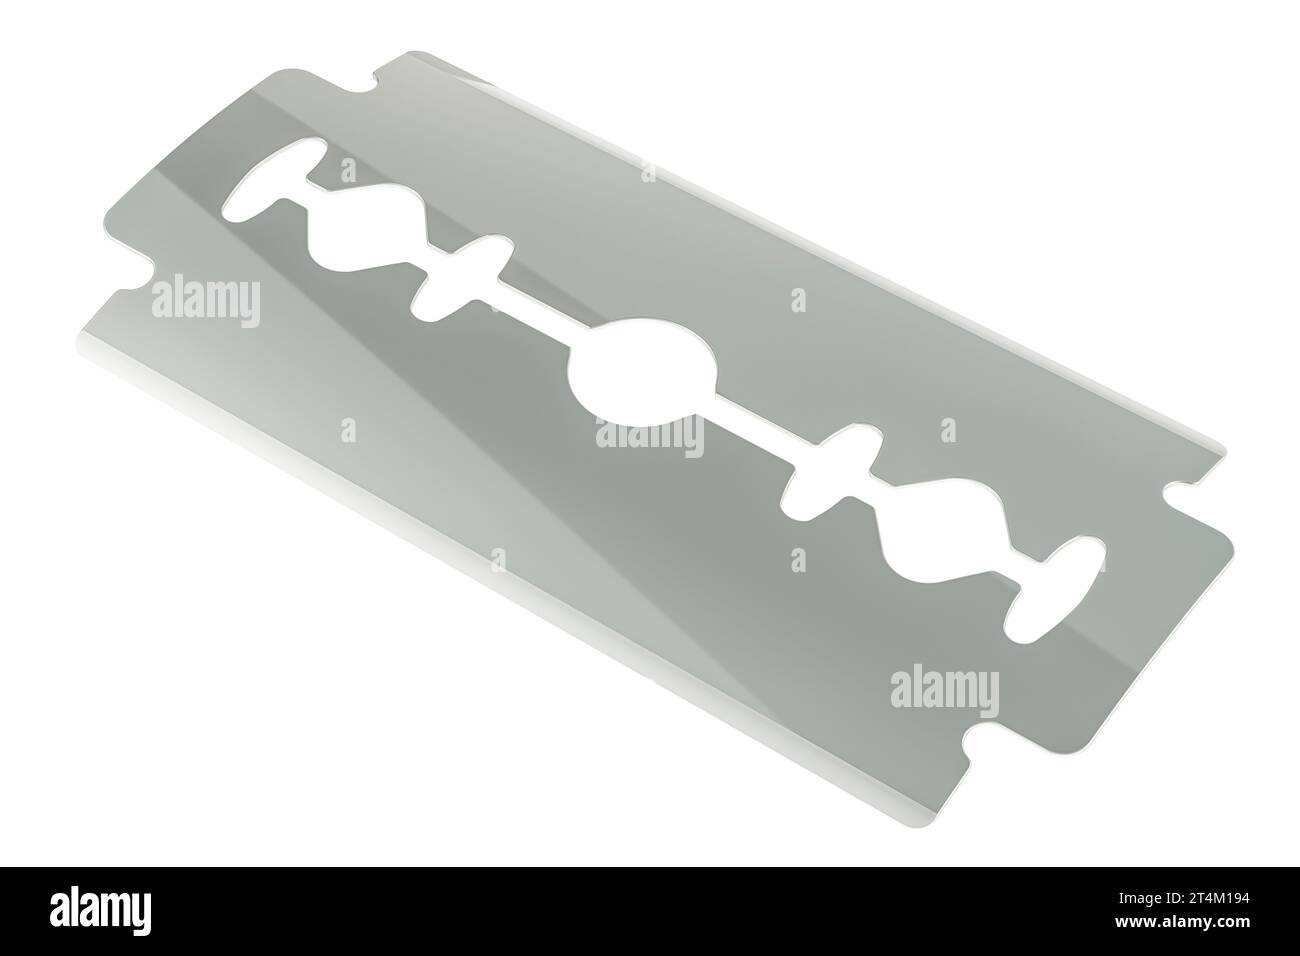 Double edge razor, stainless blade. 3D rendering isolated on white background Stock Photo